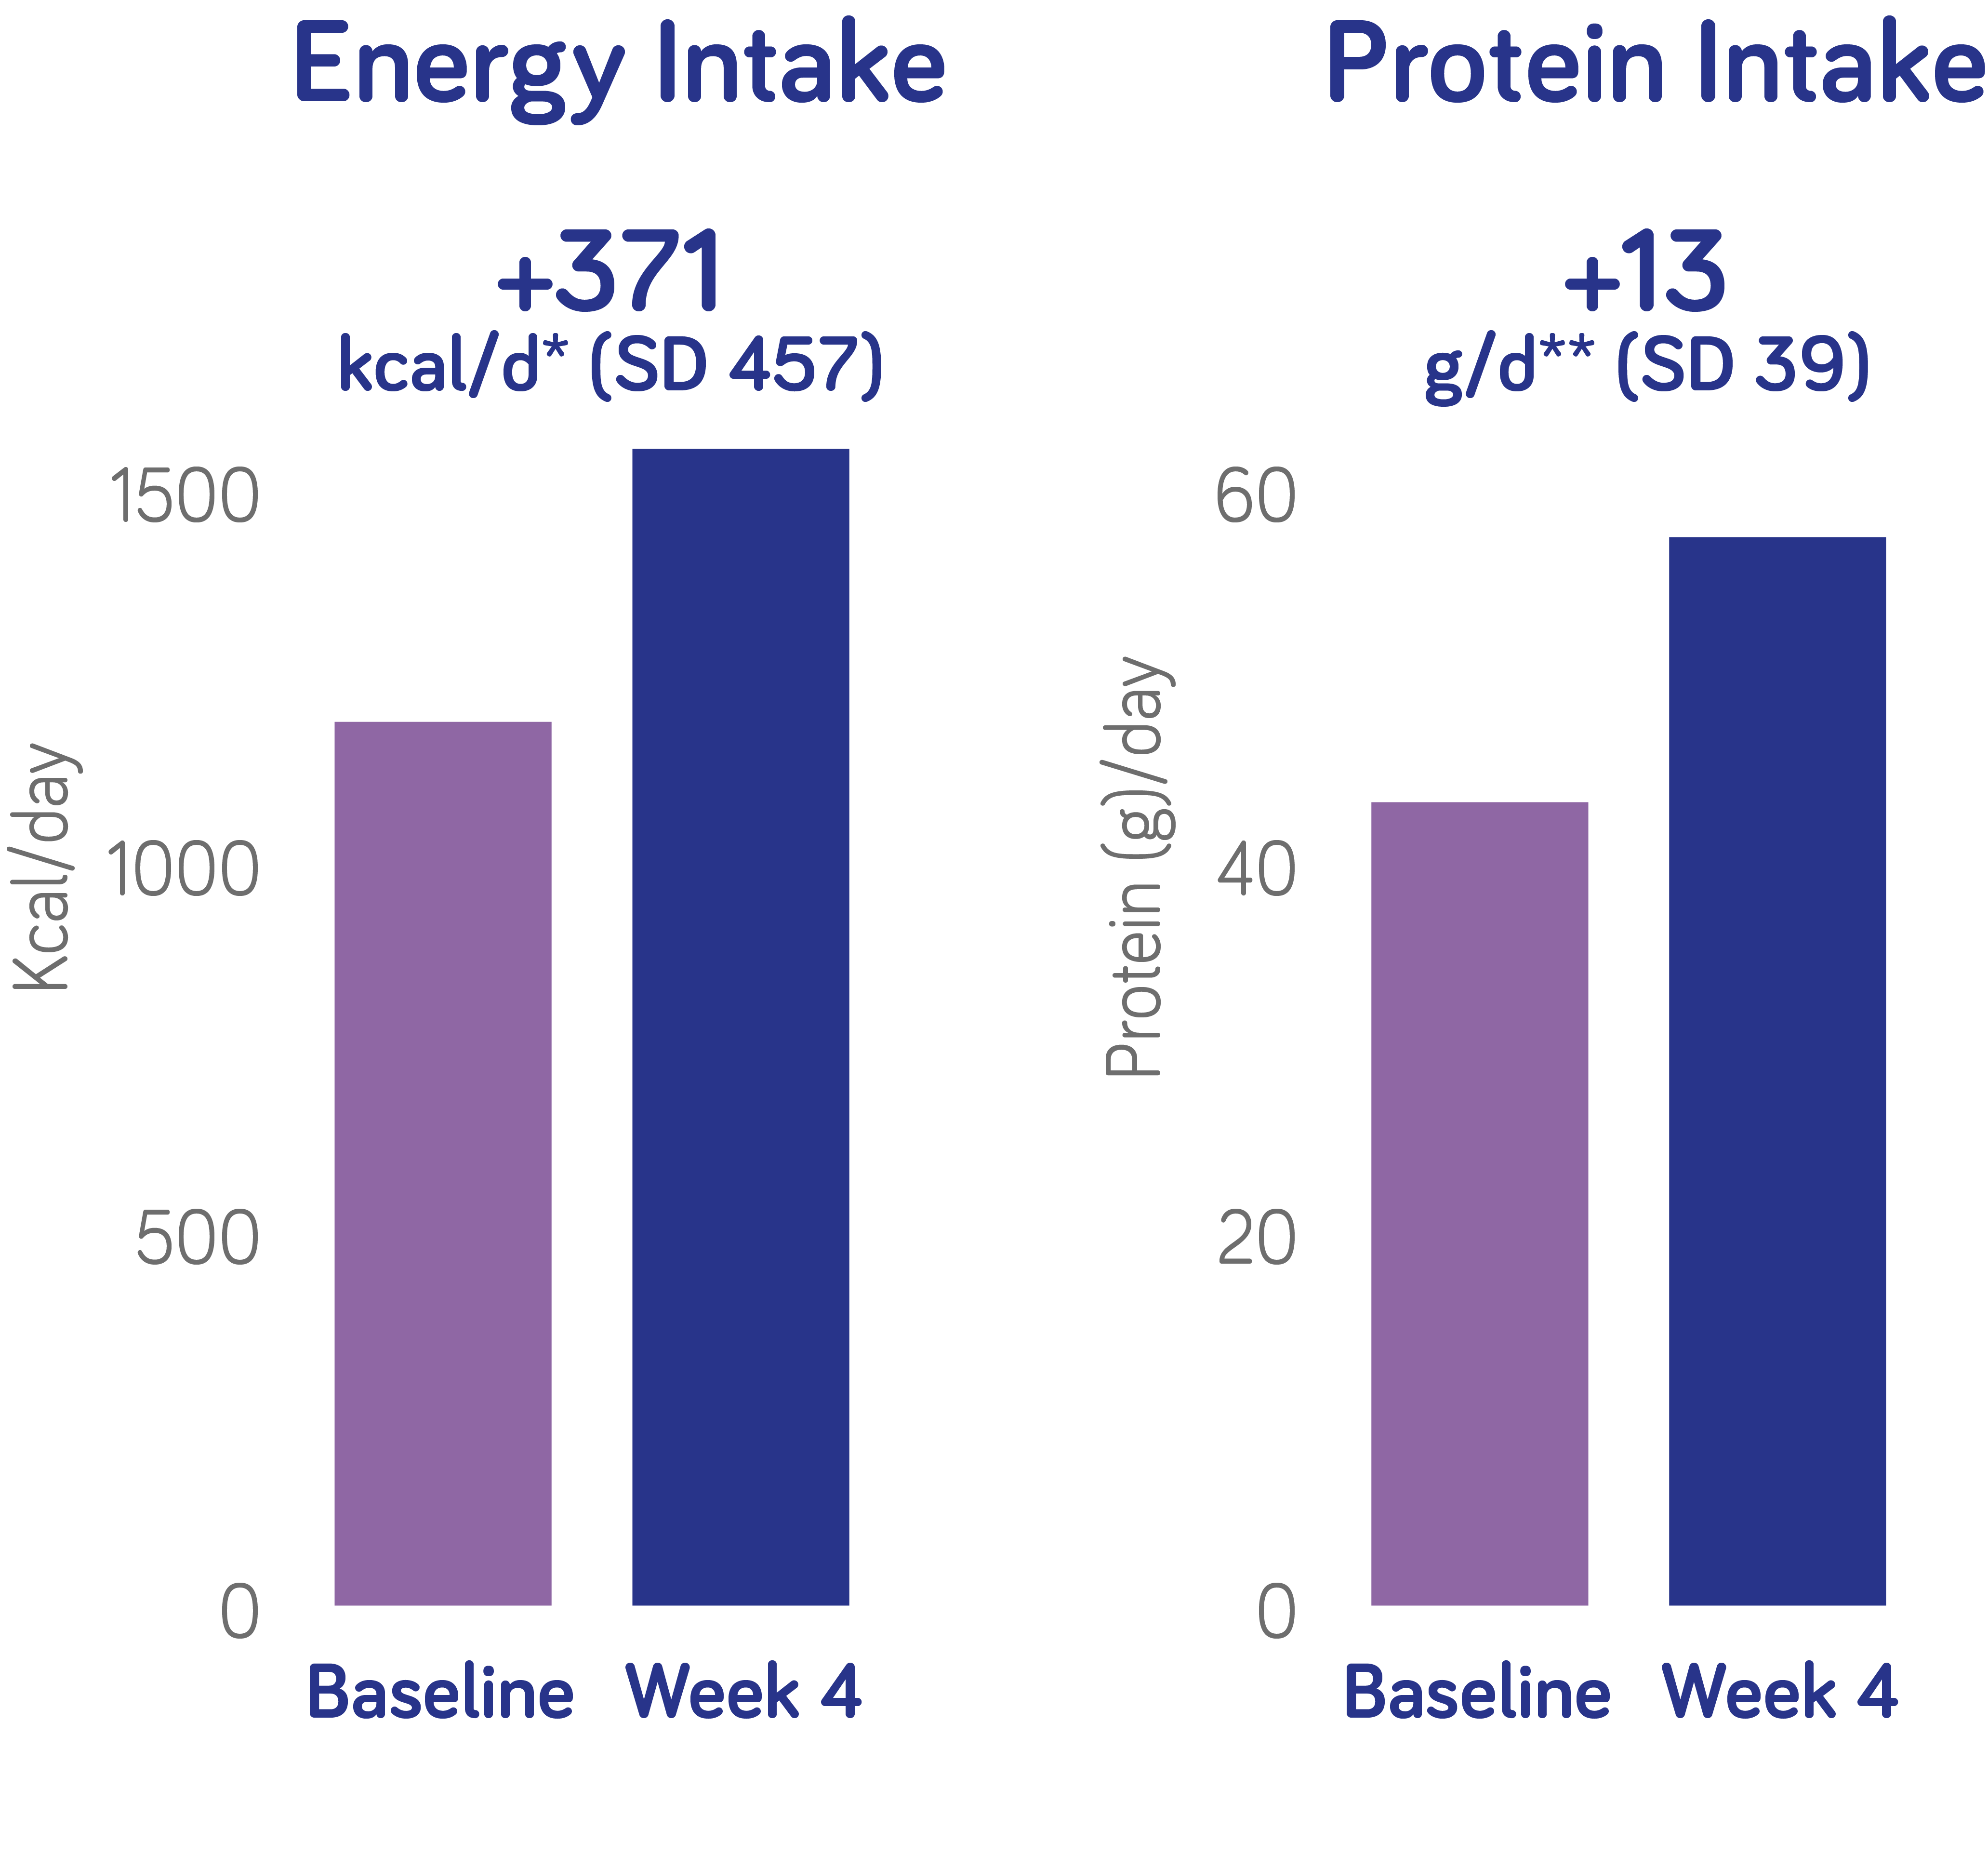 Fortimel PlantBased Energy significantly increased daily energy and protein intake compared to baseline